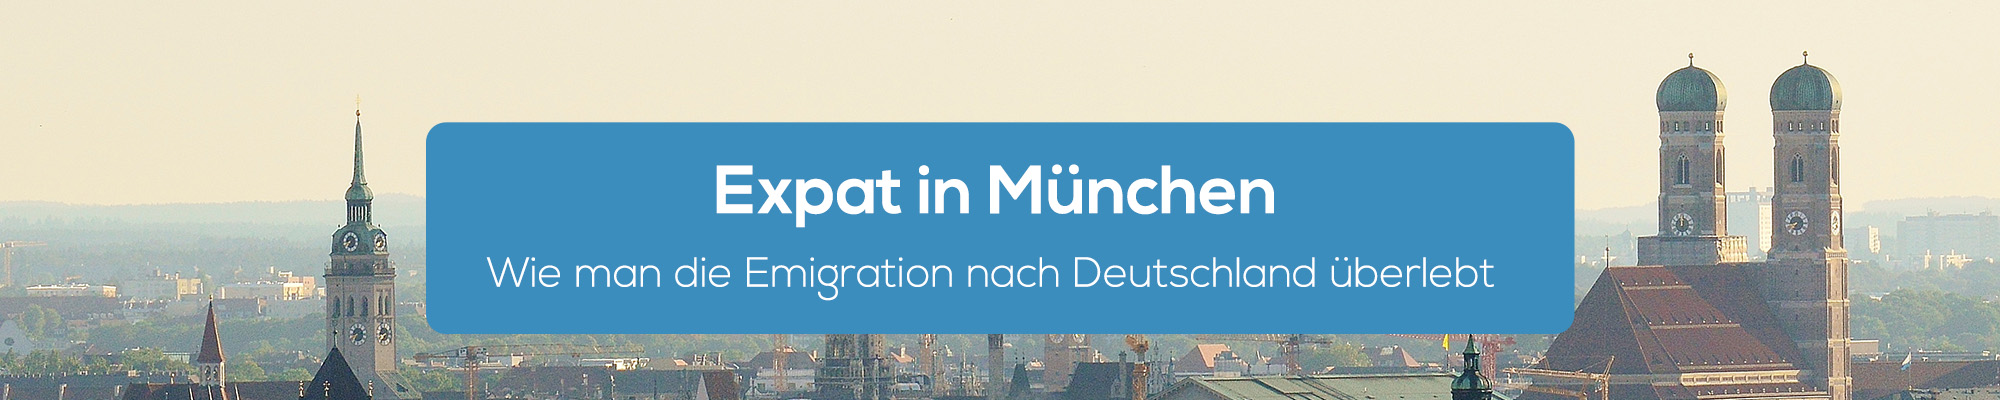 expat-in-muenchen